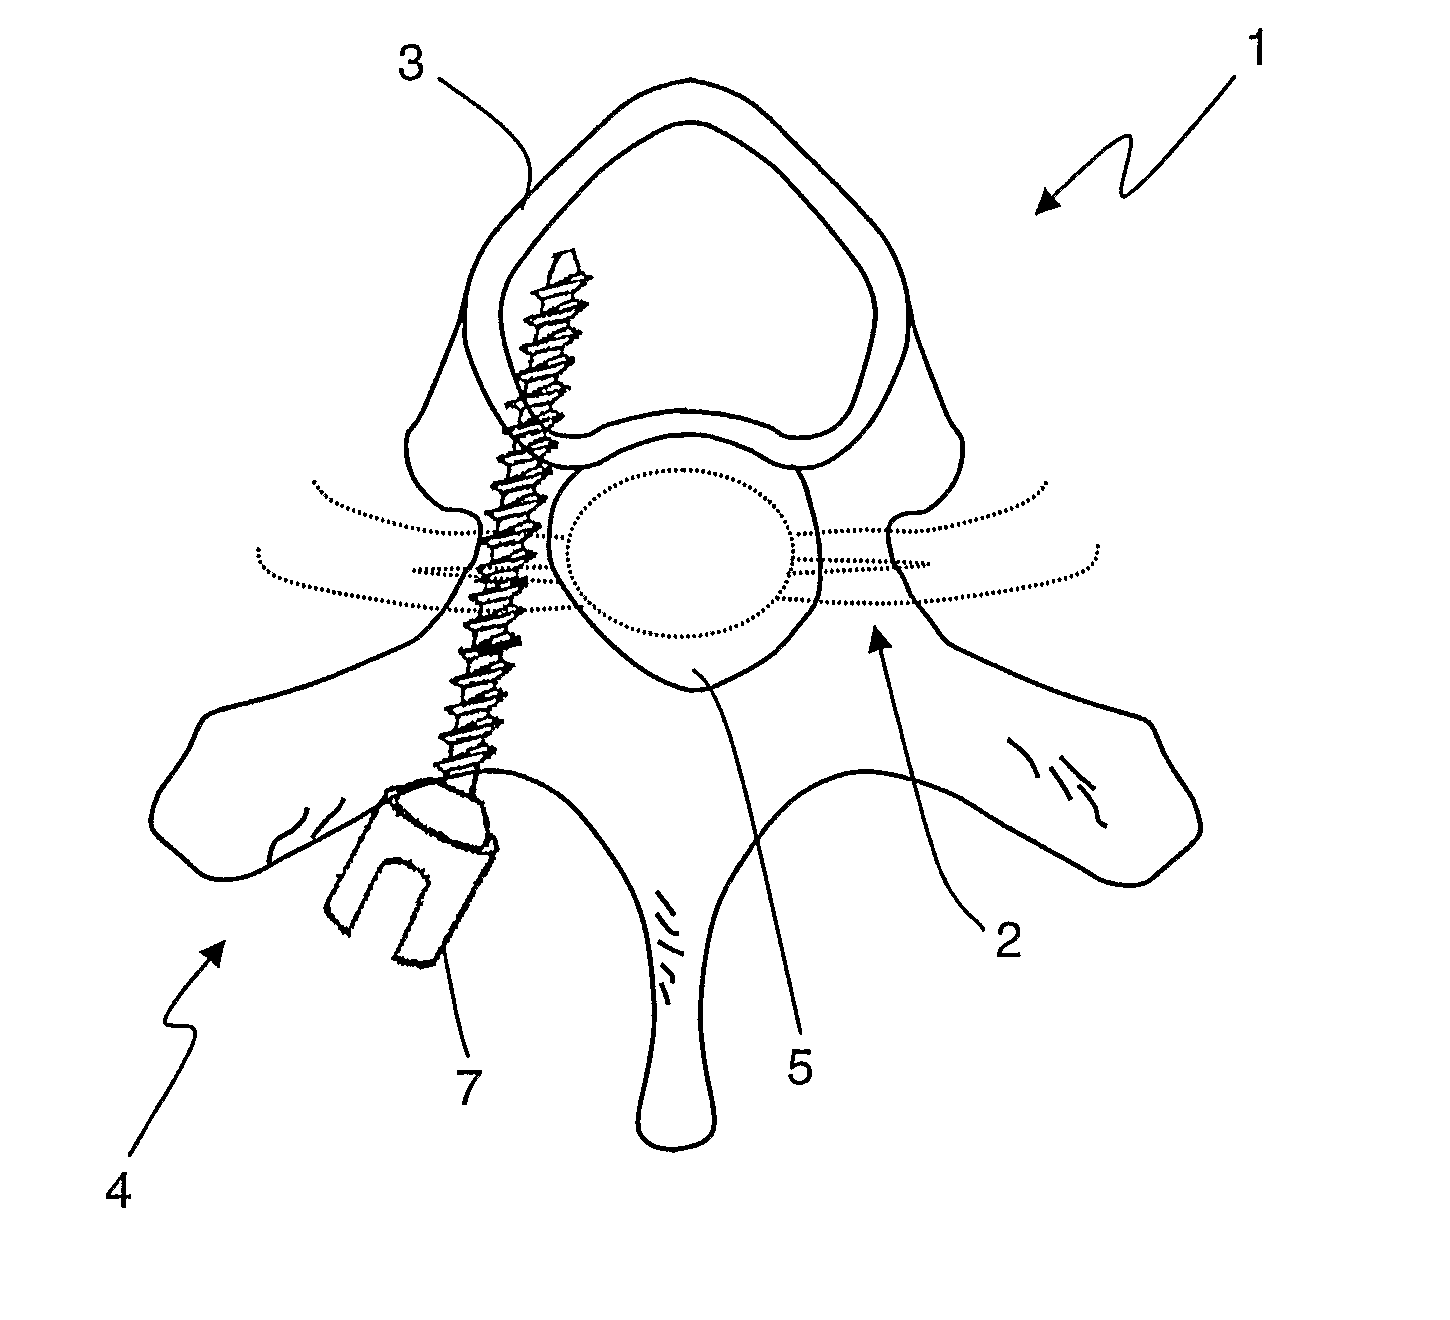 System and methods for performing pedicle integrity assessments of the thoracic spine